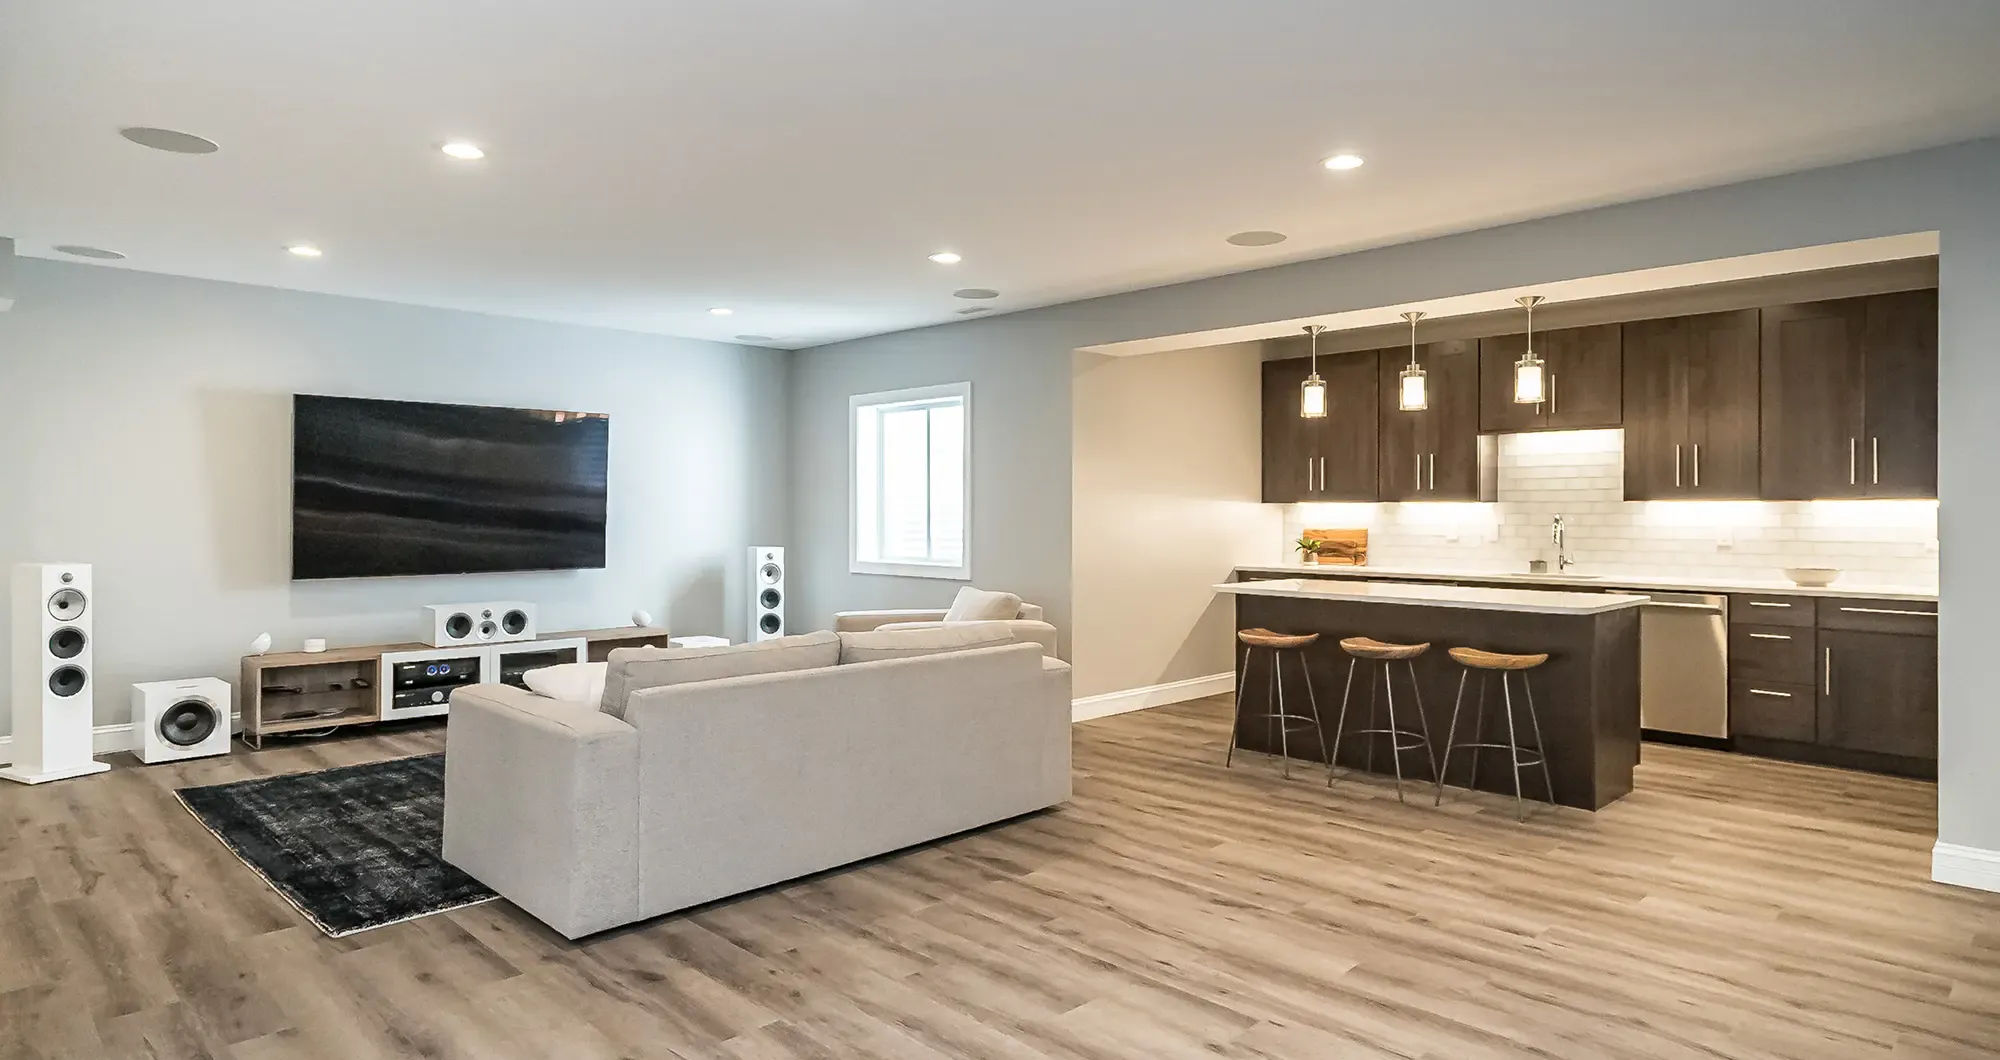 Basement Remodeling on a Budget: Maximizing Value with Financing